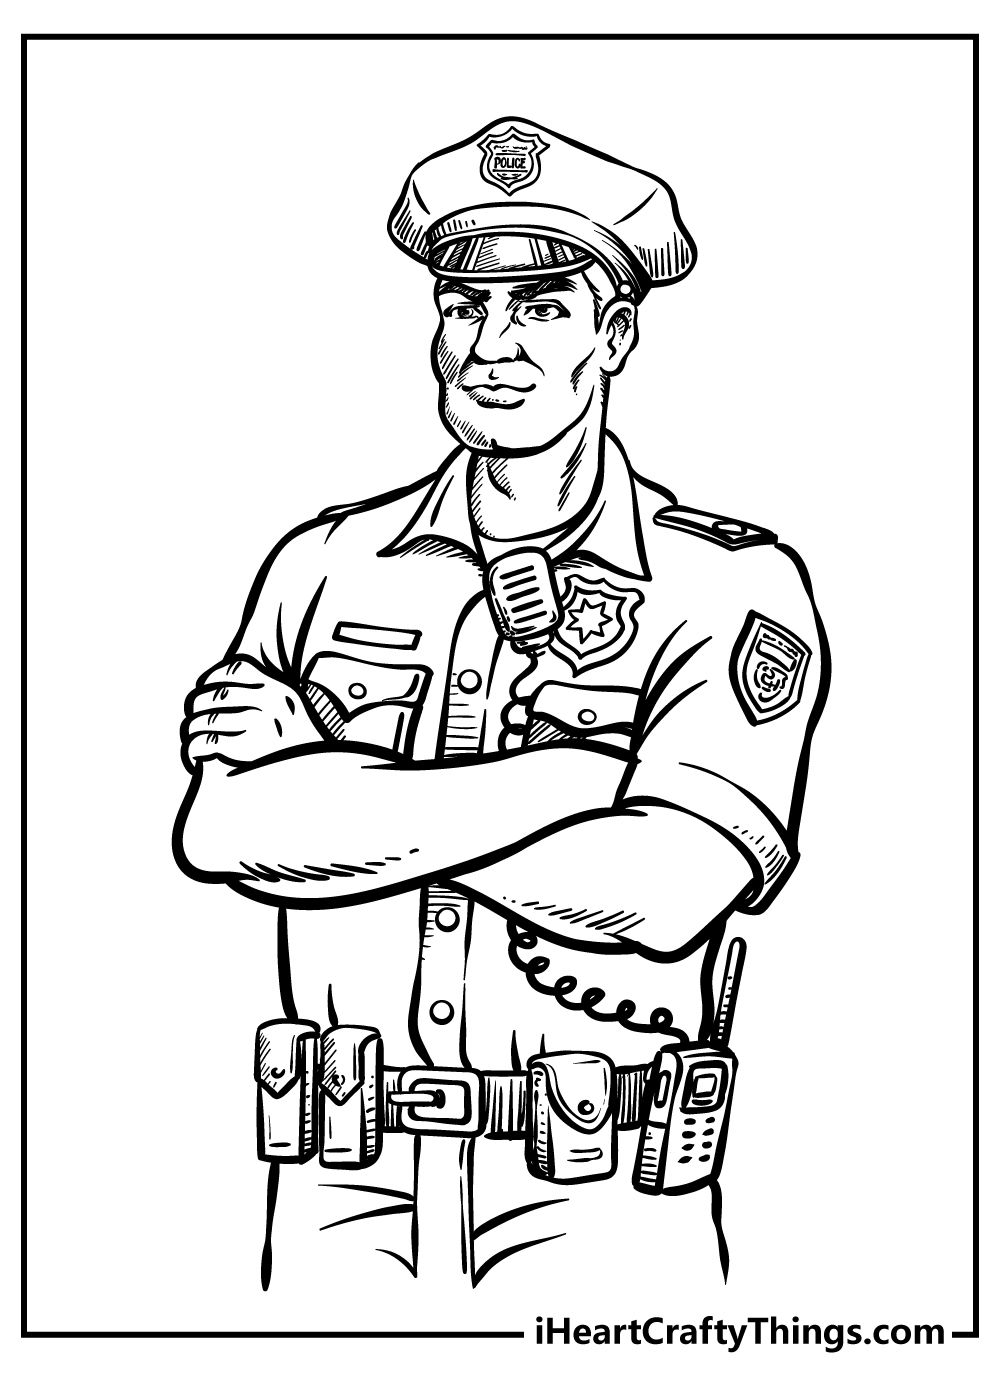 Police coloring pages adult coloring pages adult coloring book pages ic book style